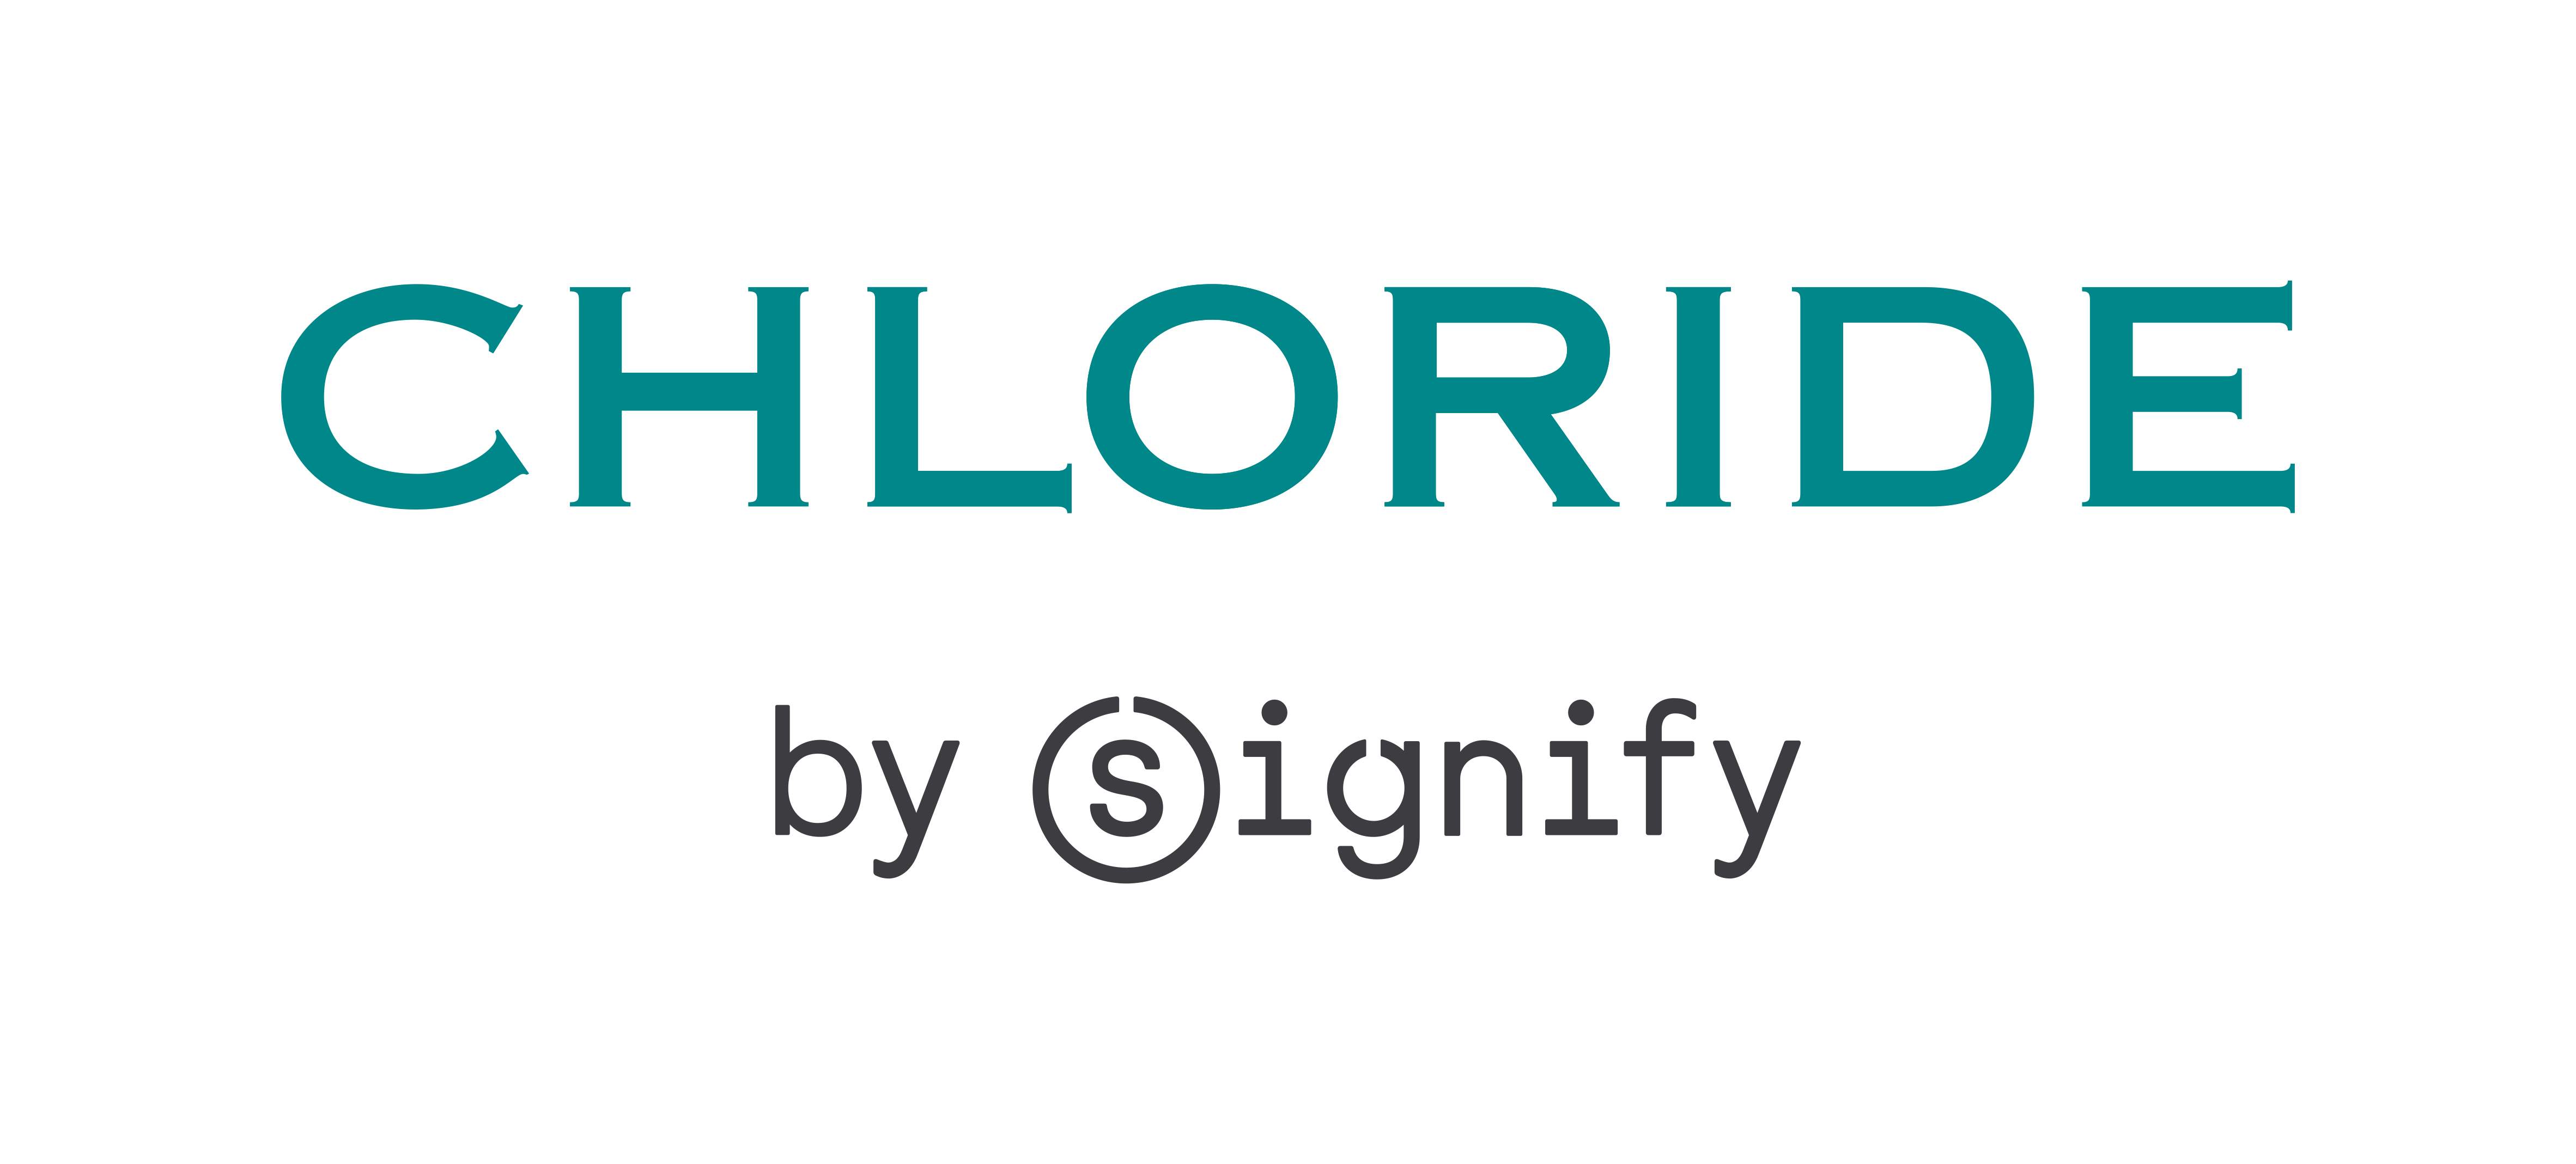 Chloride by Signify